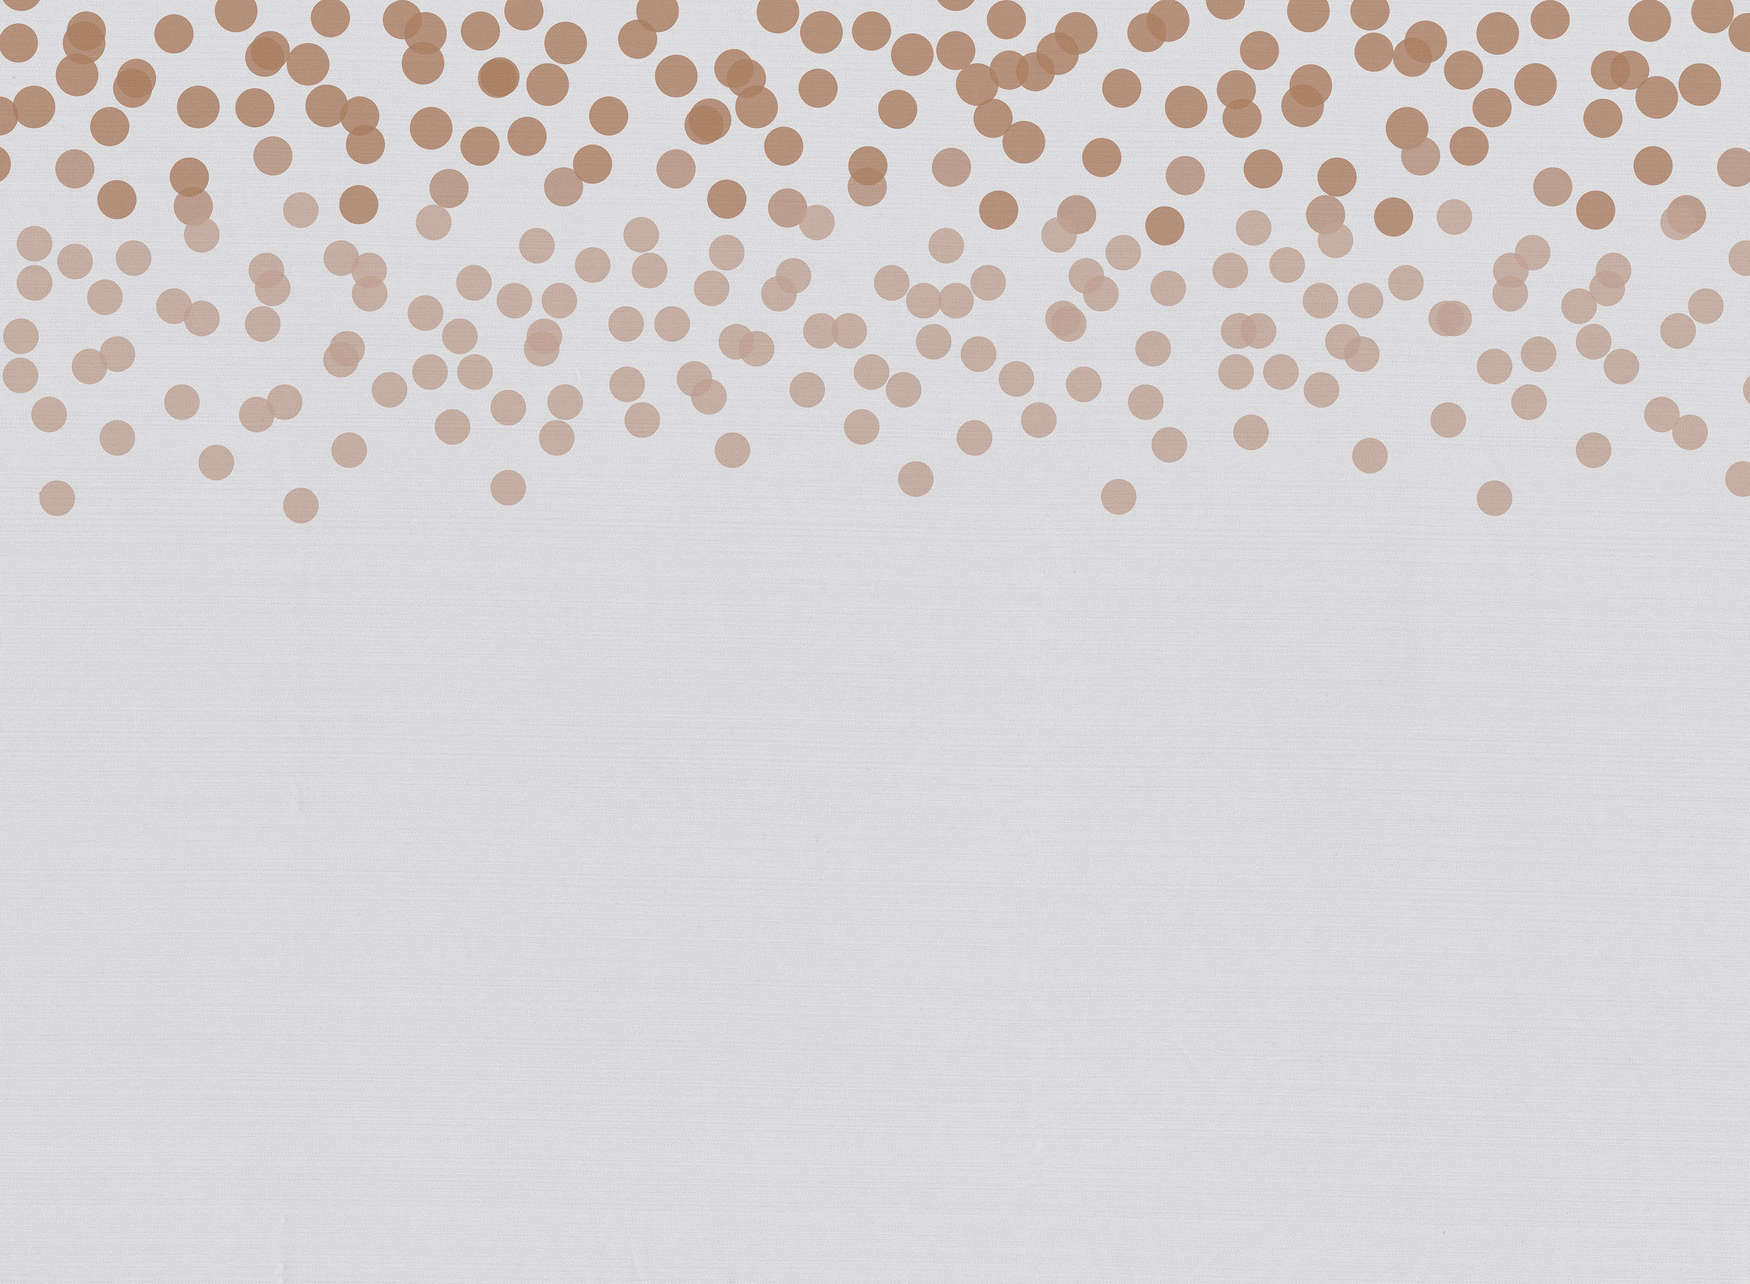             Photo wallpaper with discreet dot pattern - red, grey
        